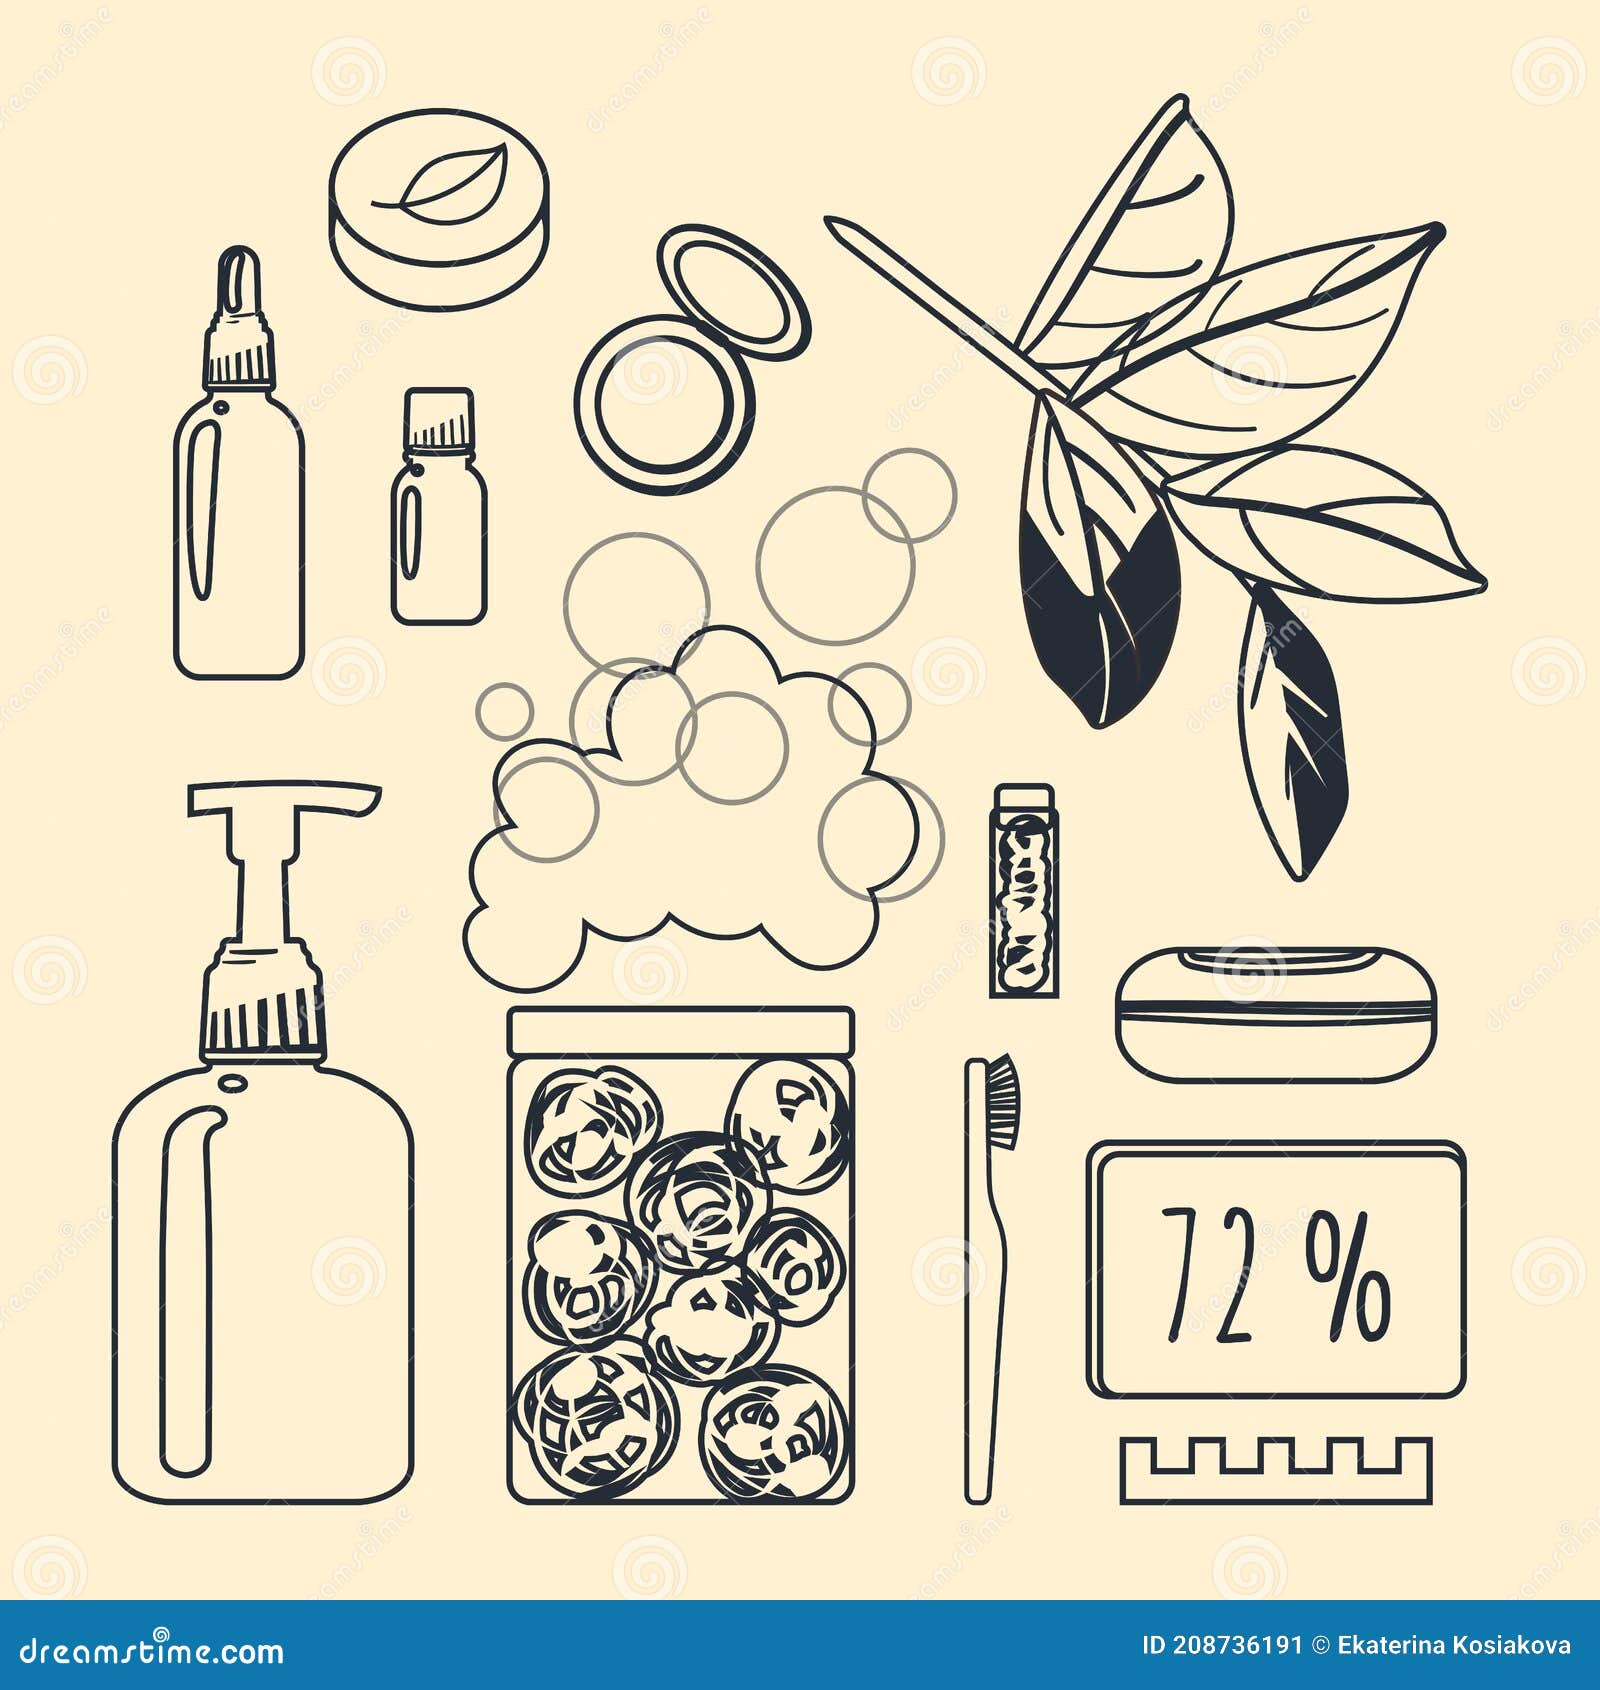 personal hygiene items drawing - Clip Art Library